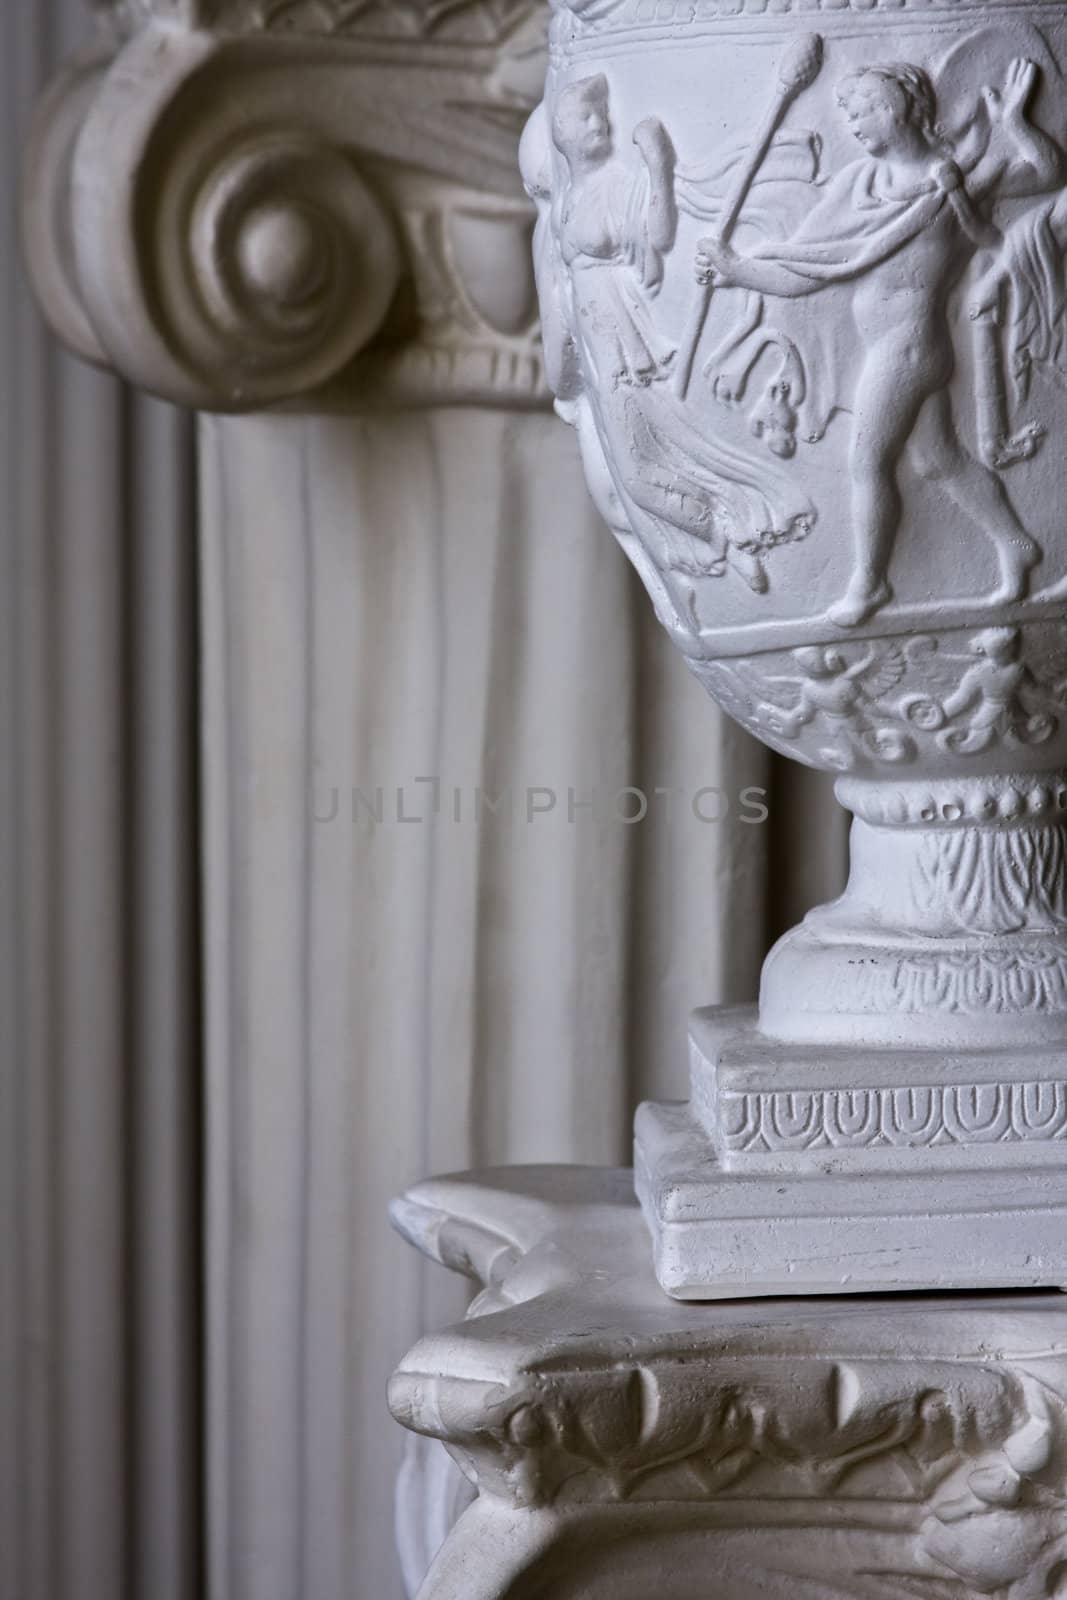 Stone Carving on Lamp by wulloa